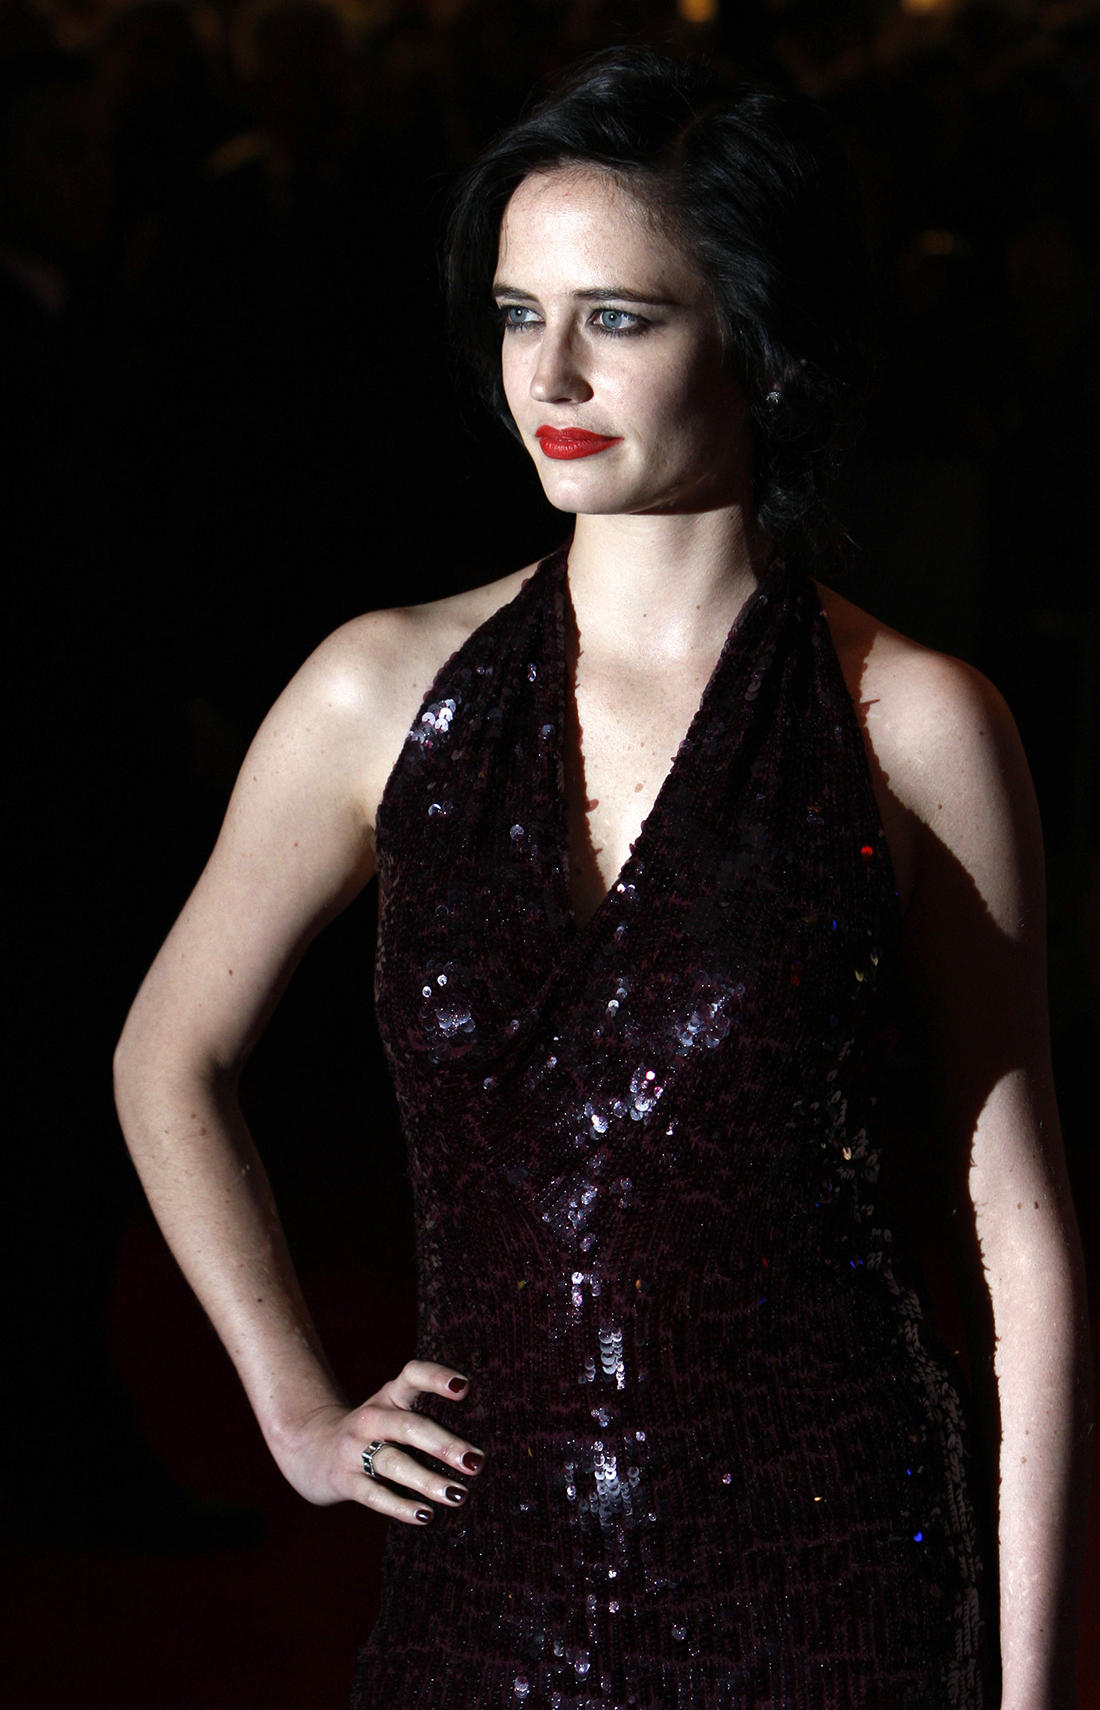 Pictures of the bold blue-eyed Hollywood diva Eva Green